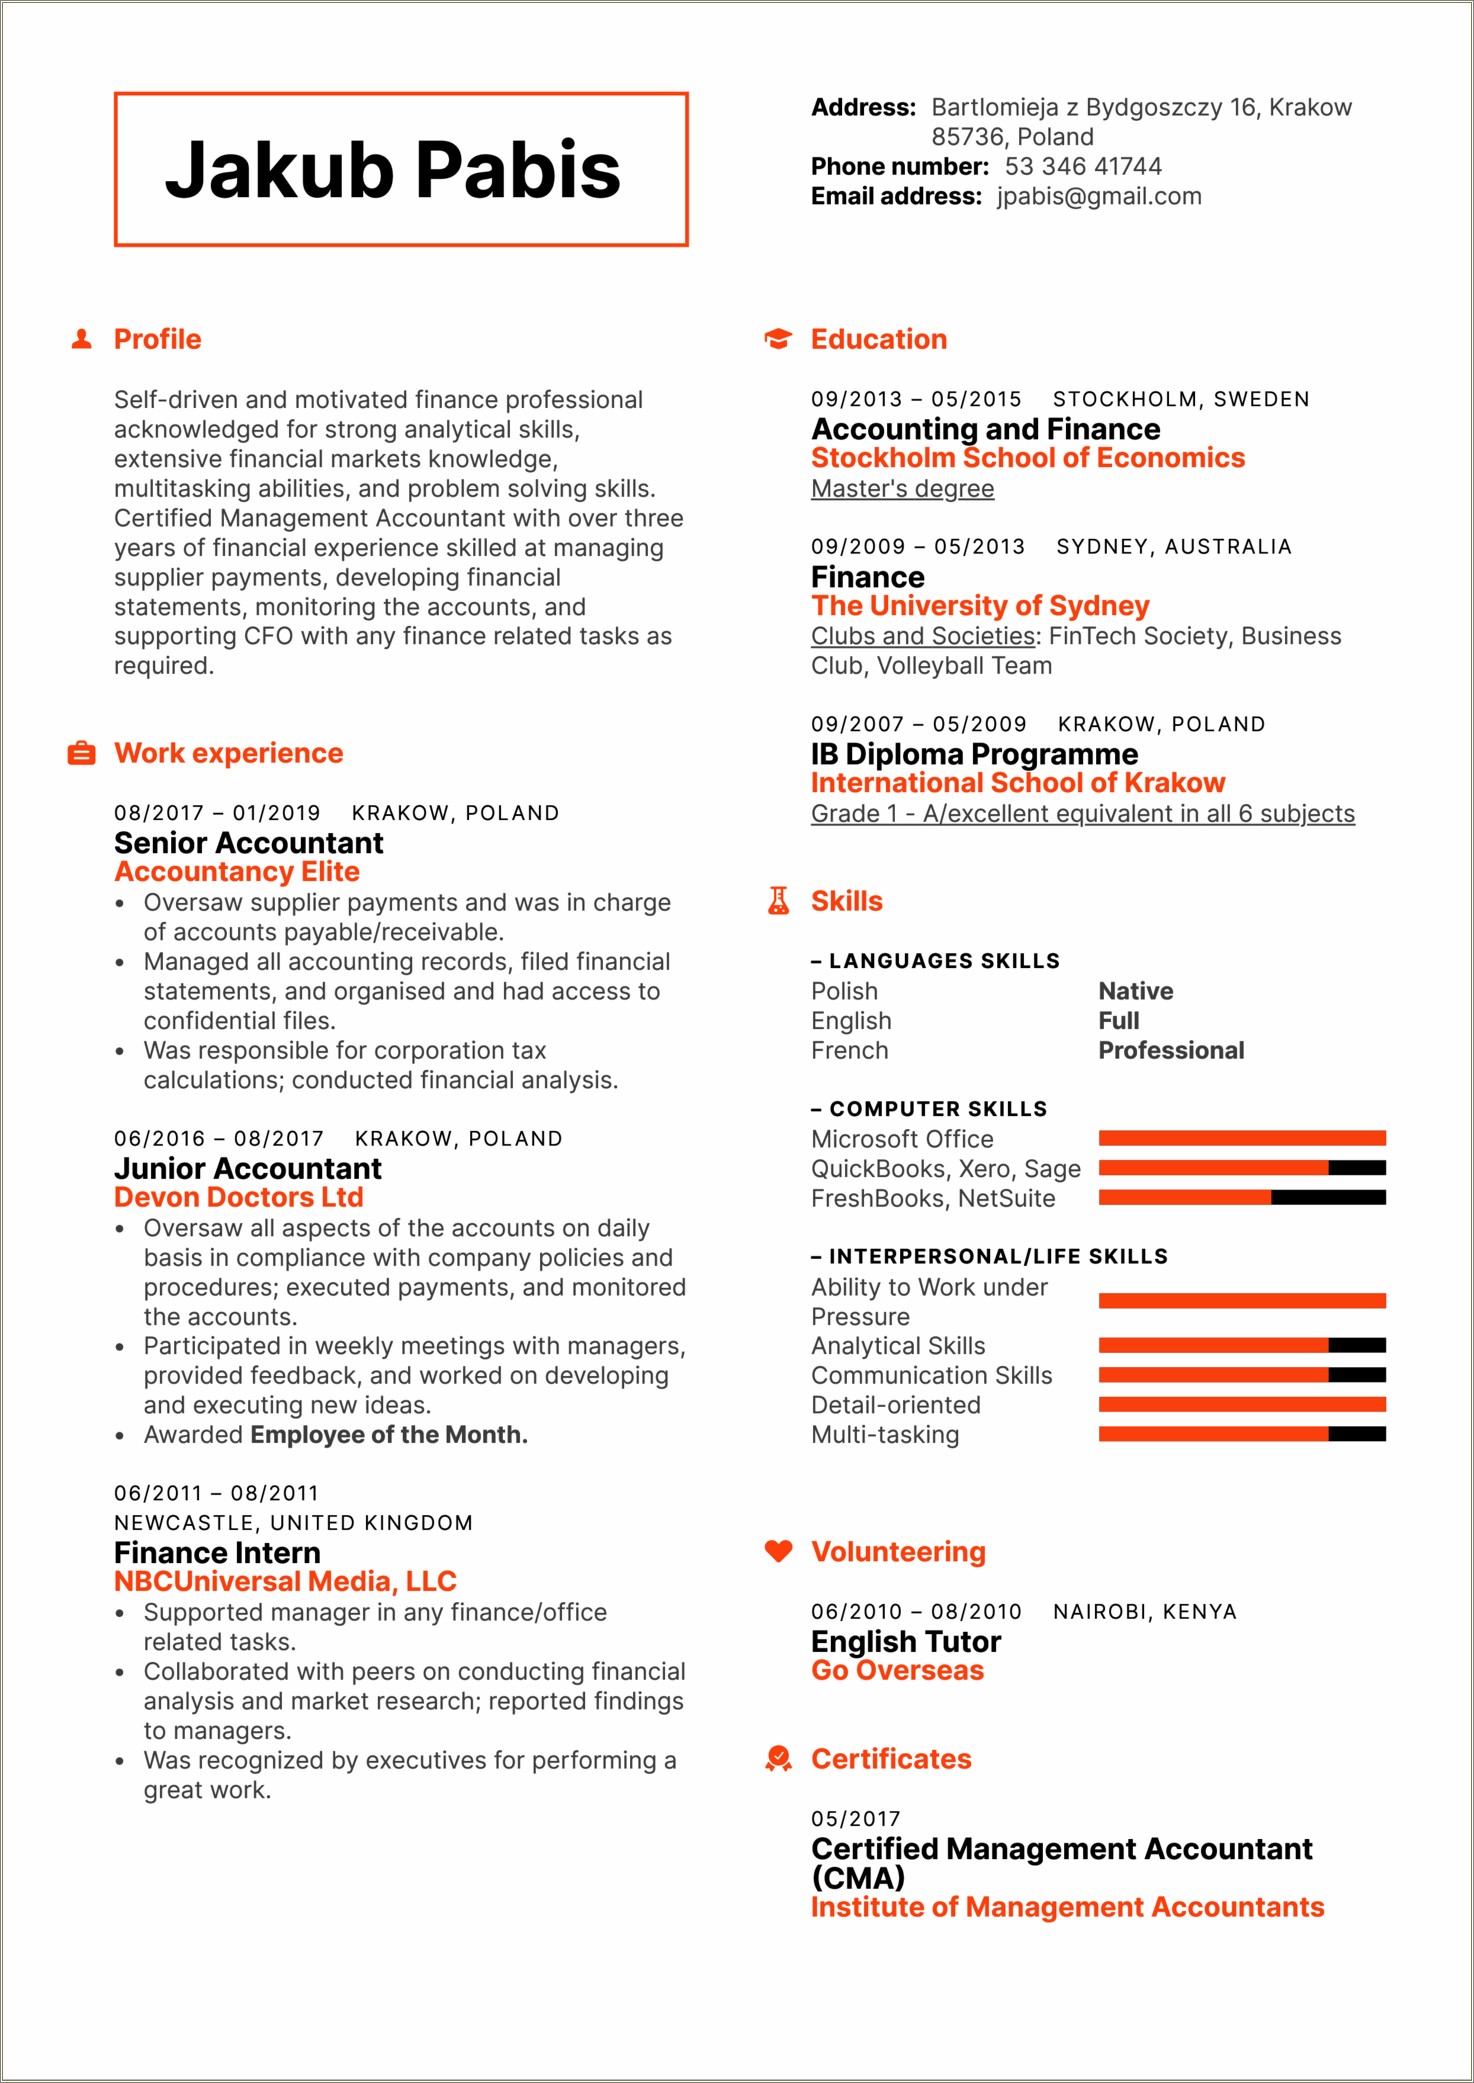 Detail Oriented Accounting Resume Objective Examples